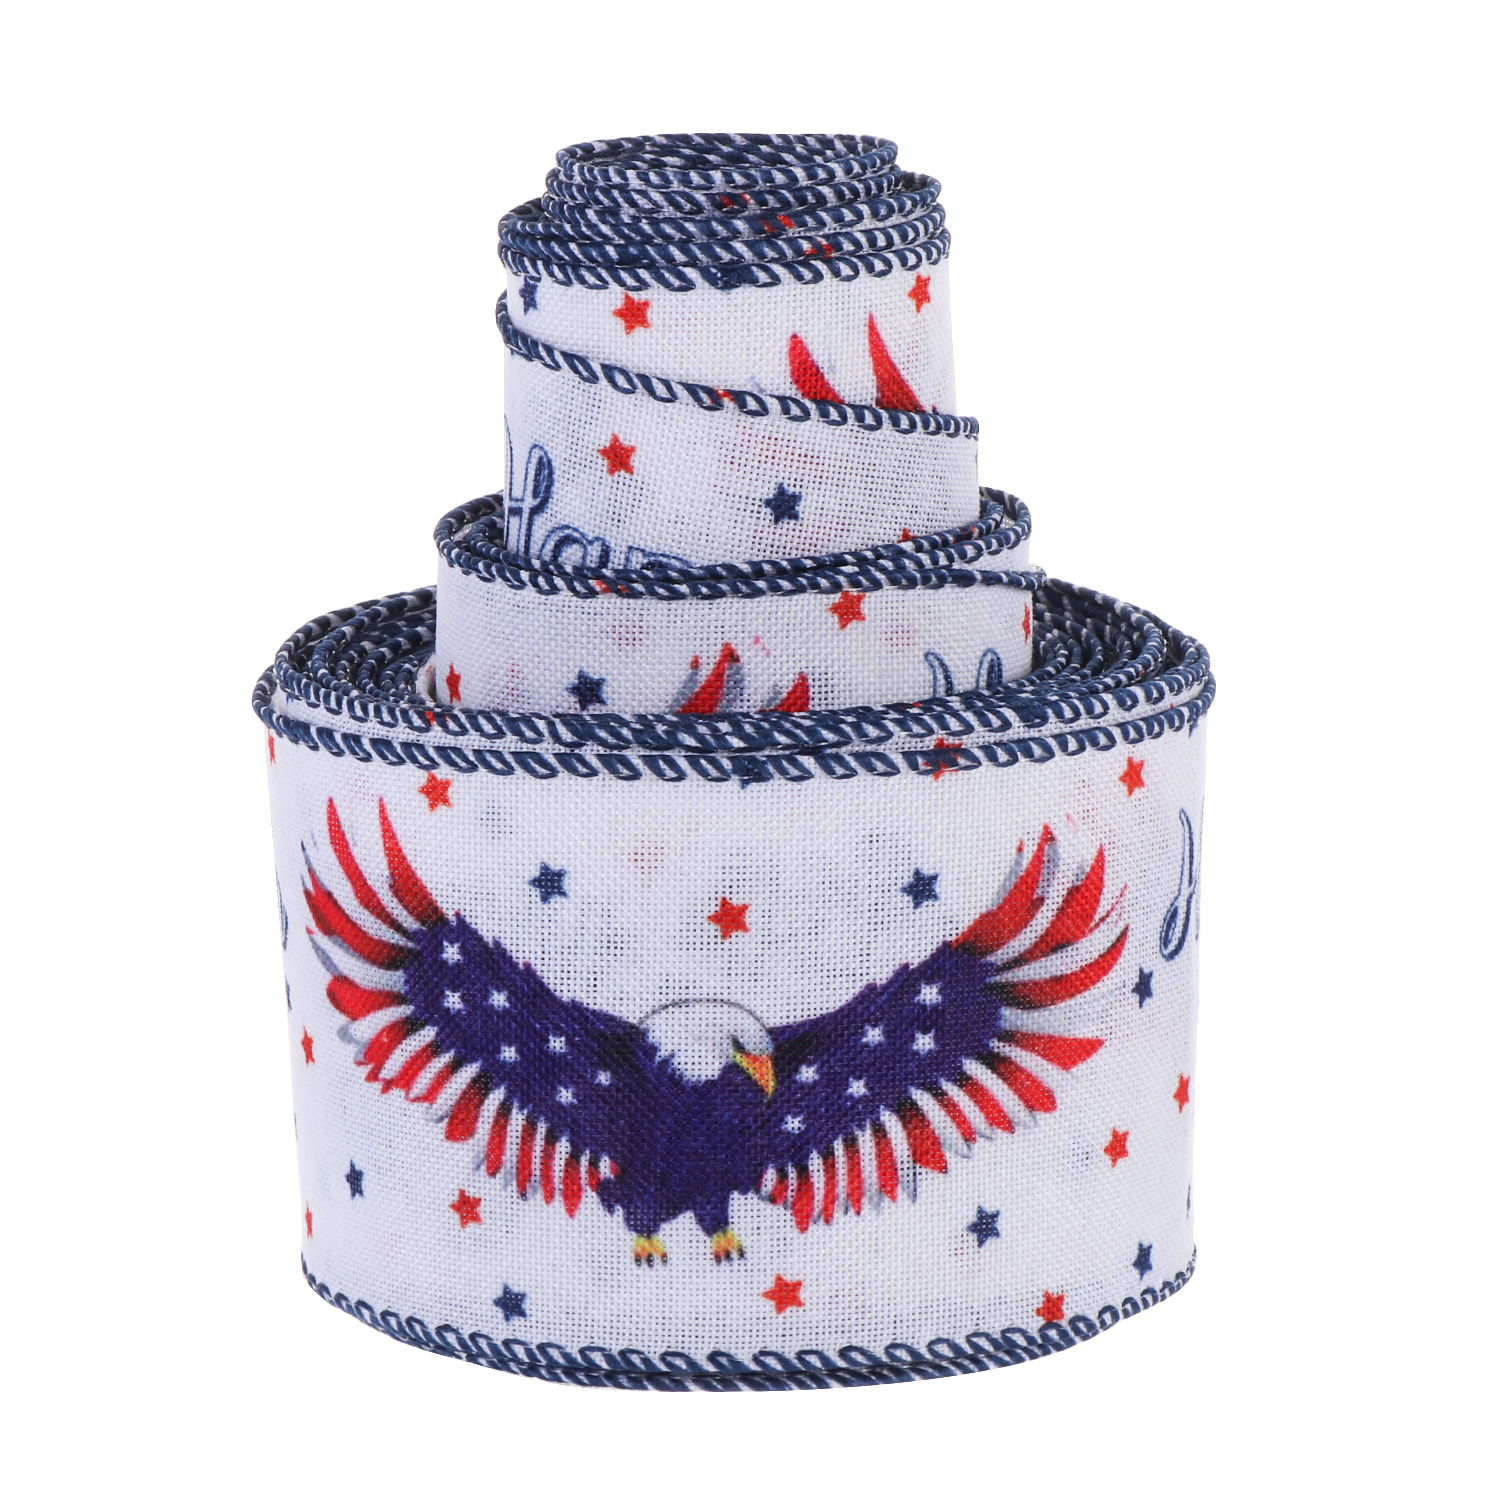 JANE Party Supplies Independence Day Eagle Cake wrapping Ribbon Color Ribbon New Card Decor Gift Wrapping July 4 Crafts Accessories Red Blue White Holiday Decoration